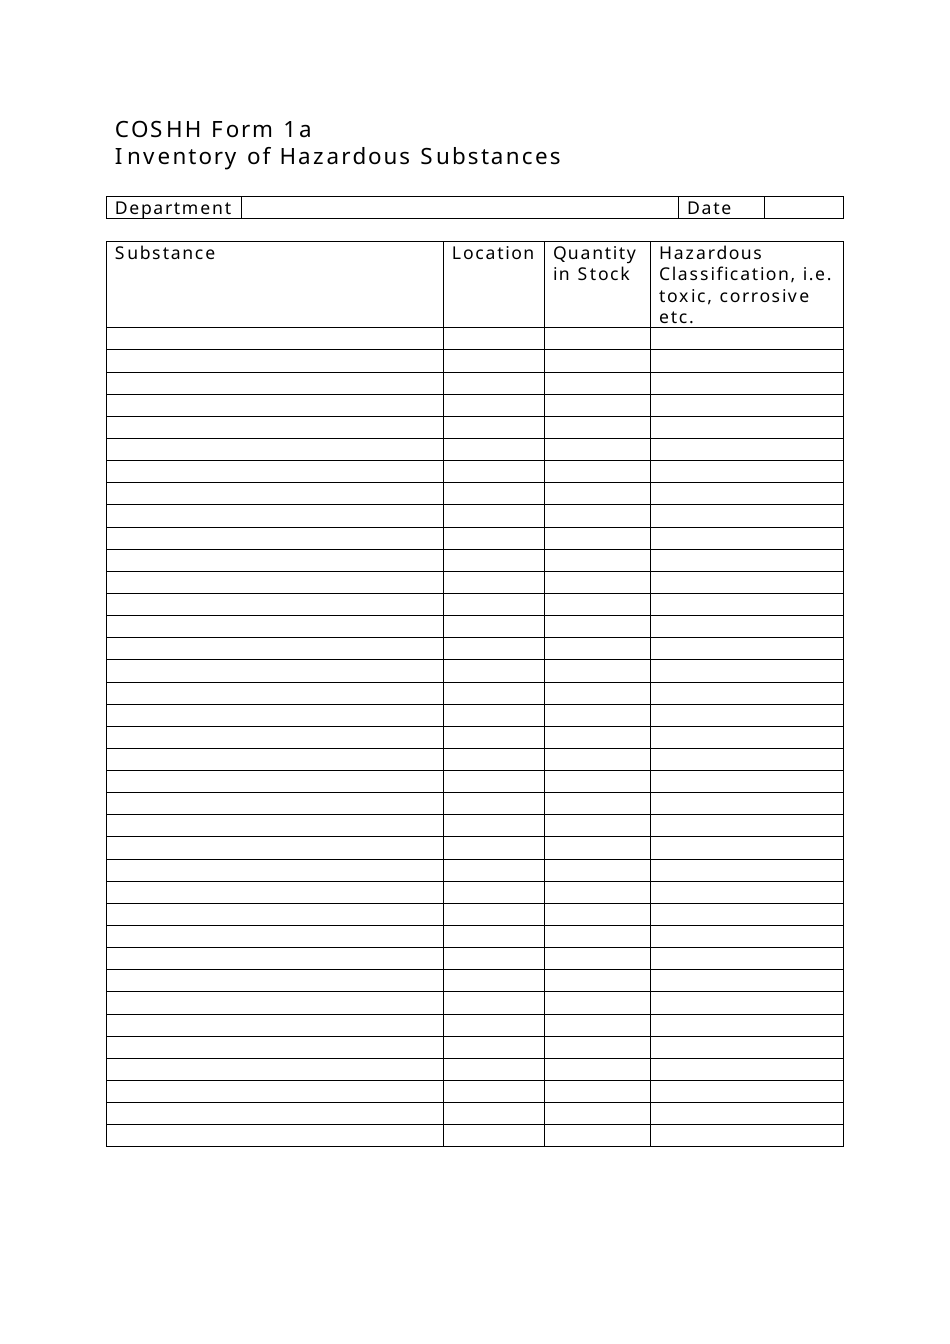 Hazardous Substances Inventory Spreadsheet Template - Efficiently manage and track dangerous materials